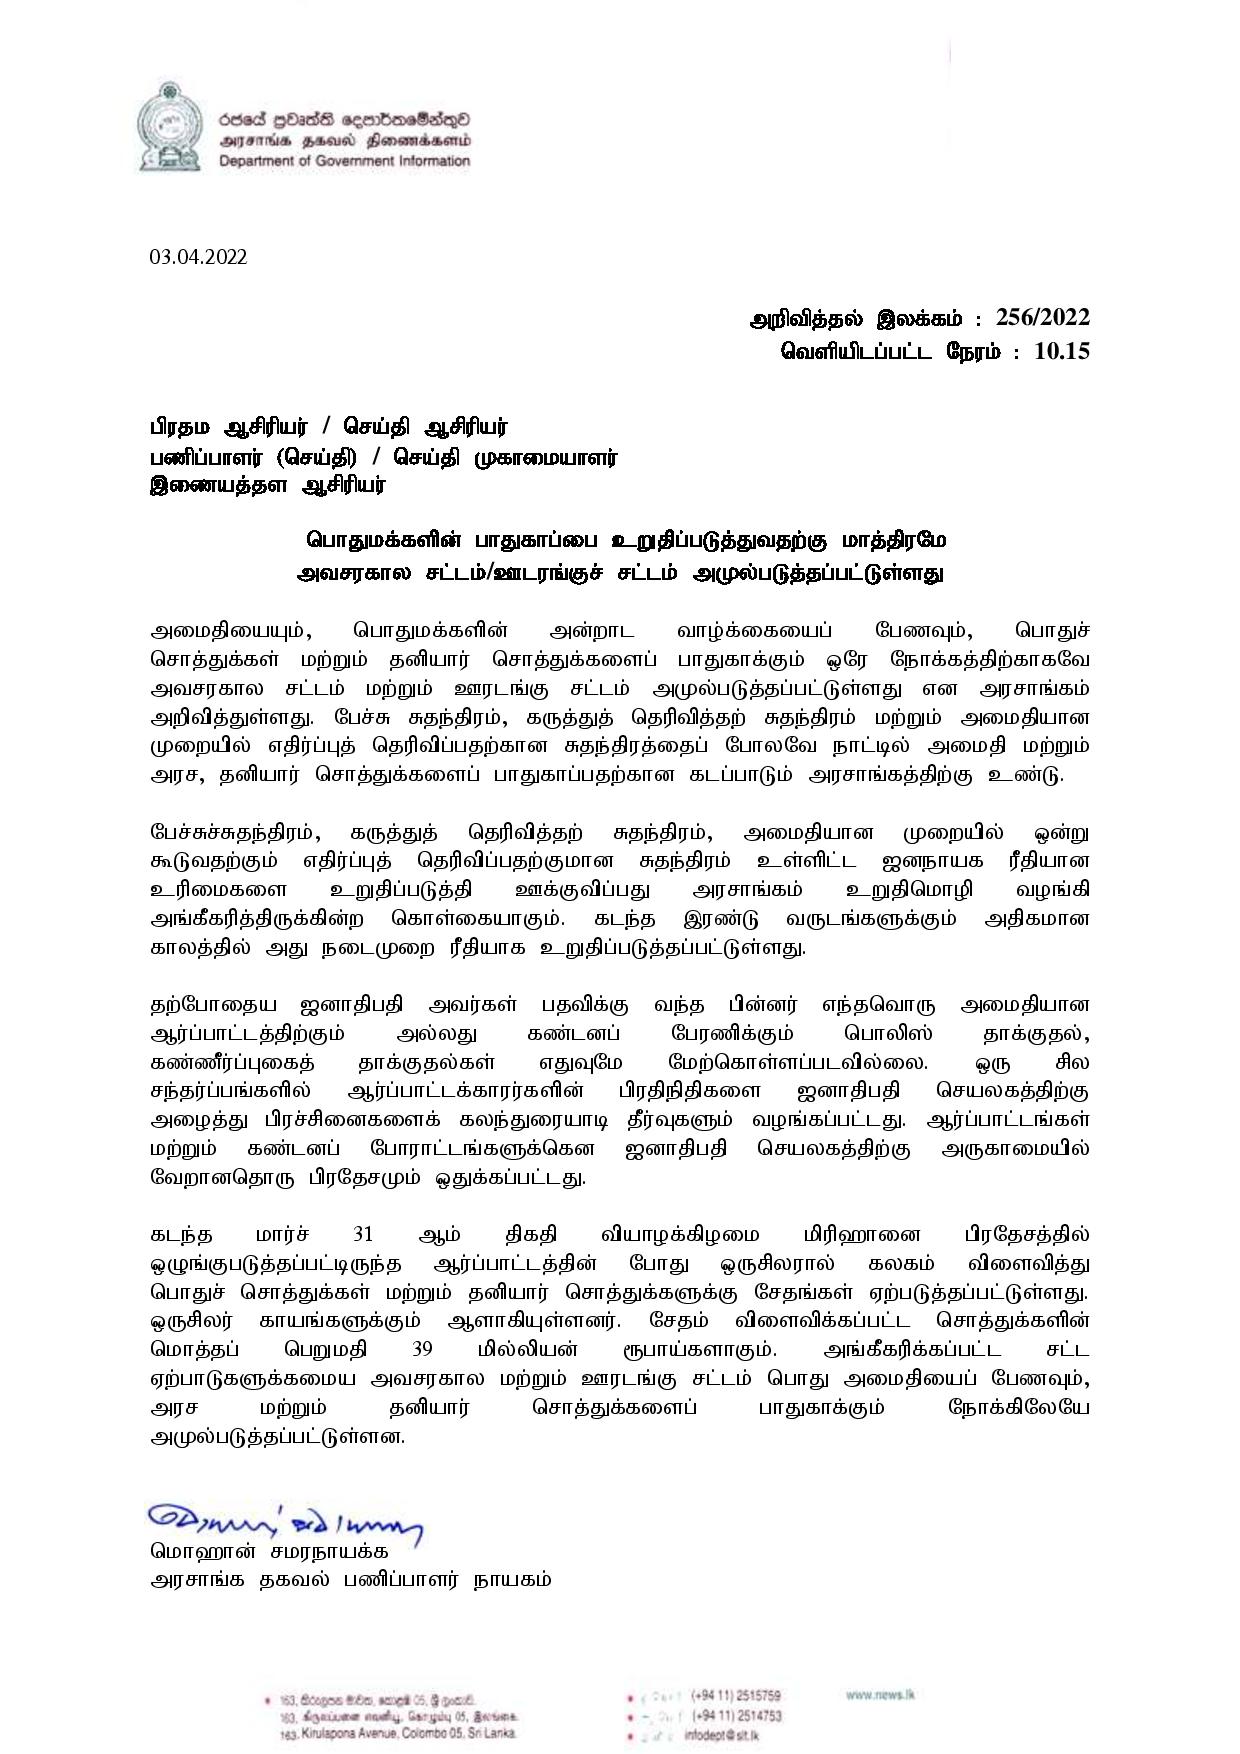 Release No 256 Tamil page 001